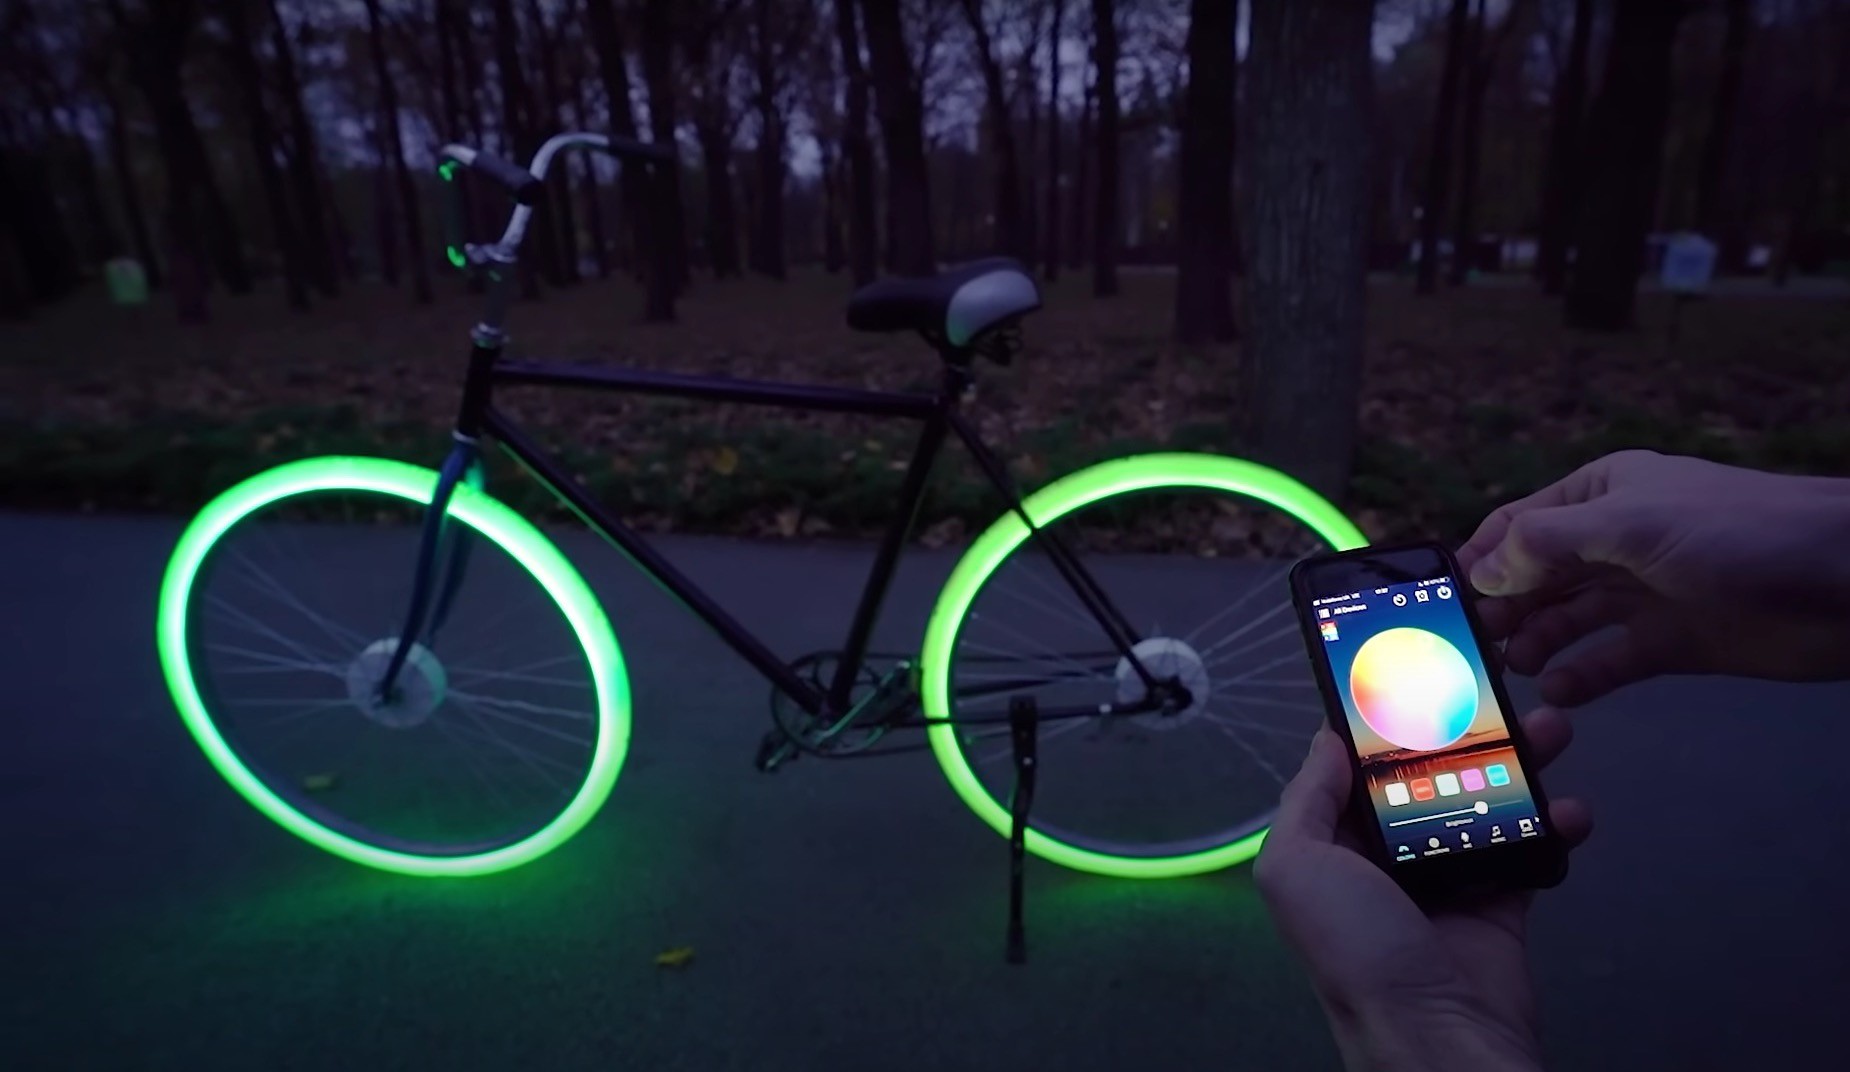 Bike With Wheels Made From Hot Glue Gun Sticks Gets RGB Color-Changing Lights - autoevolution